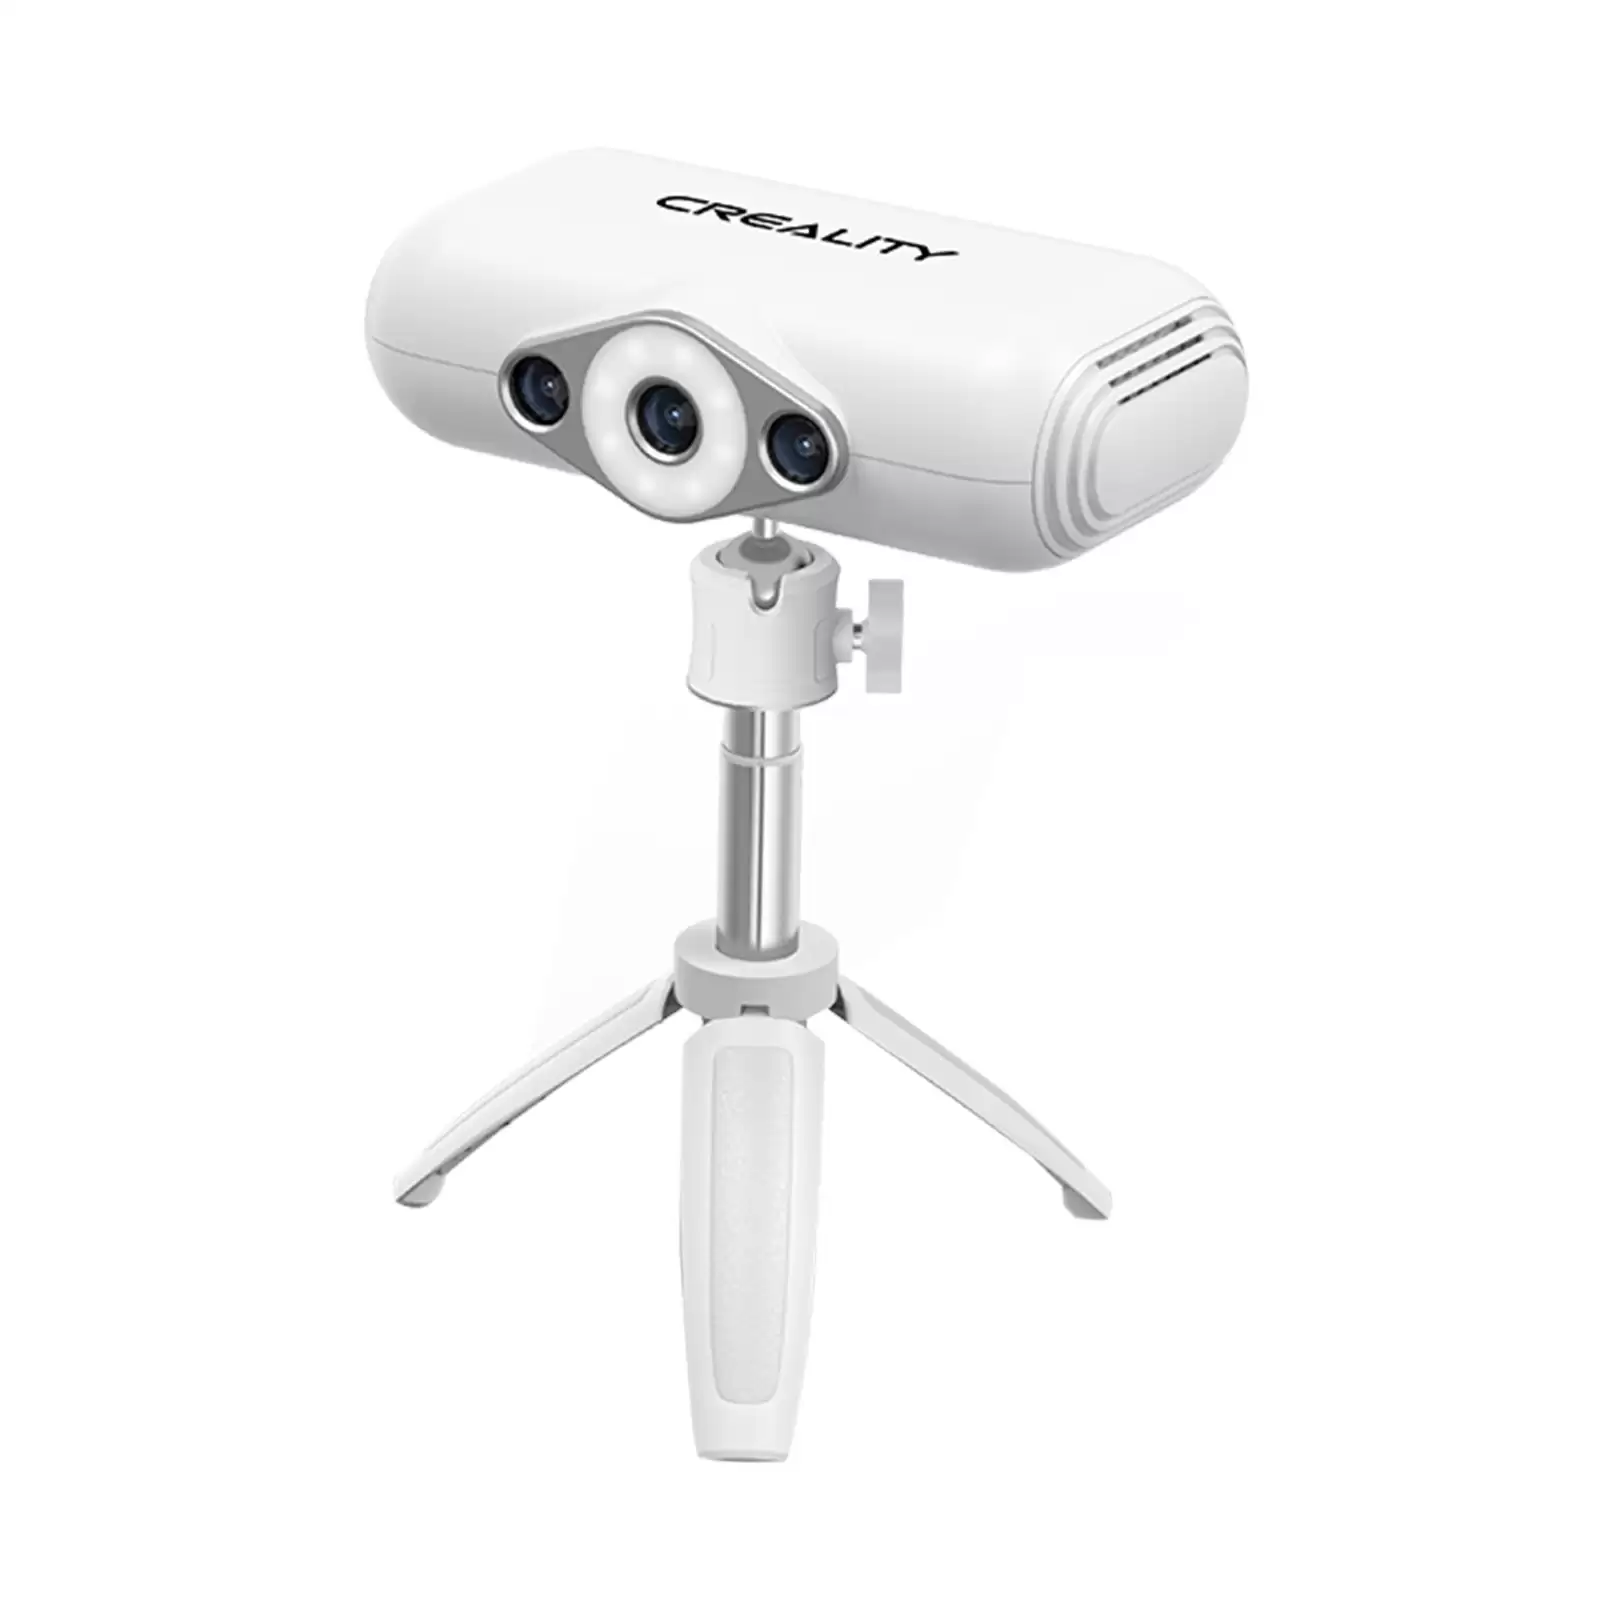 Order In Just $549 Original Creality Cr-scan Lizard Premium Portable 3d Scanner With Tripod At Tomtop